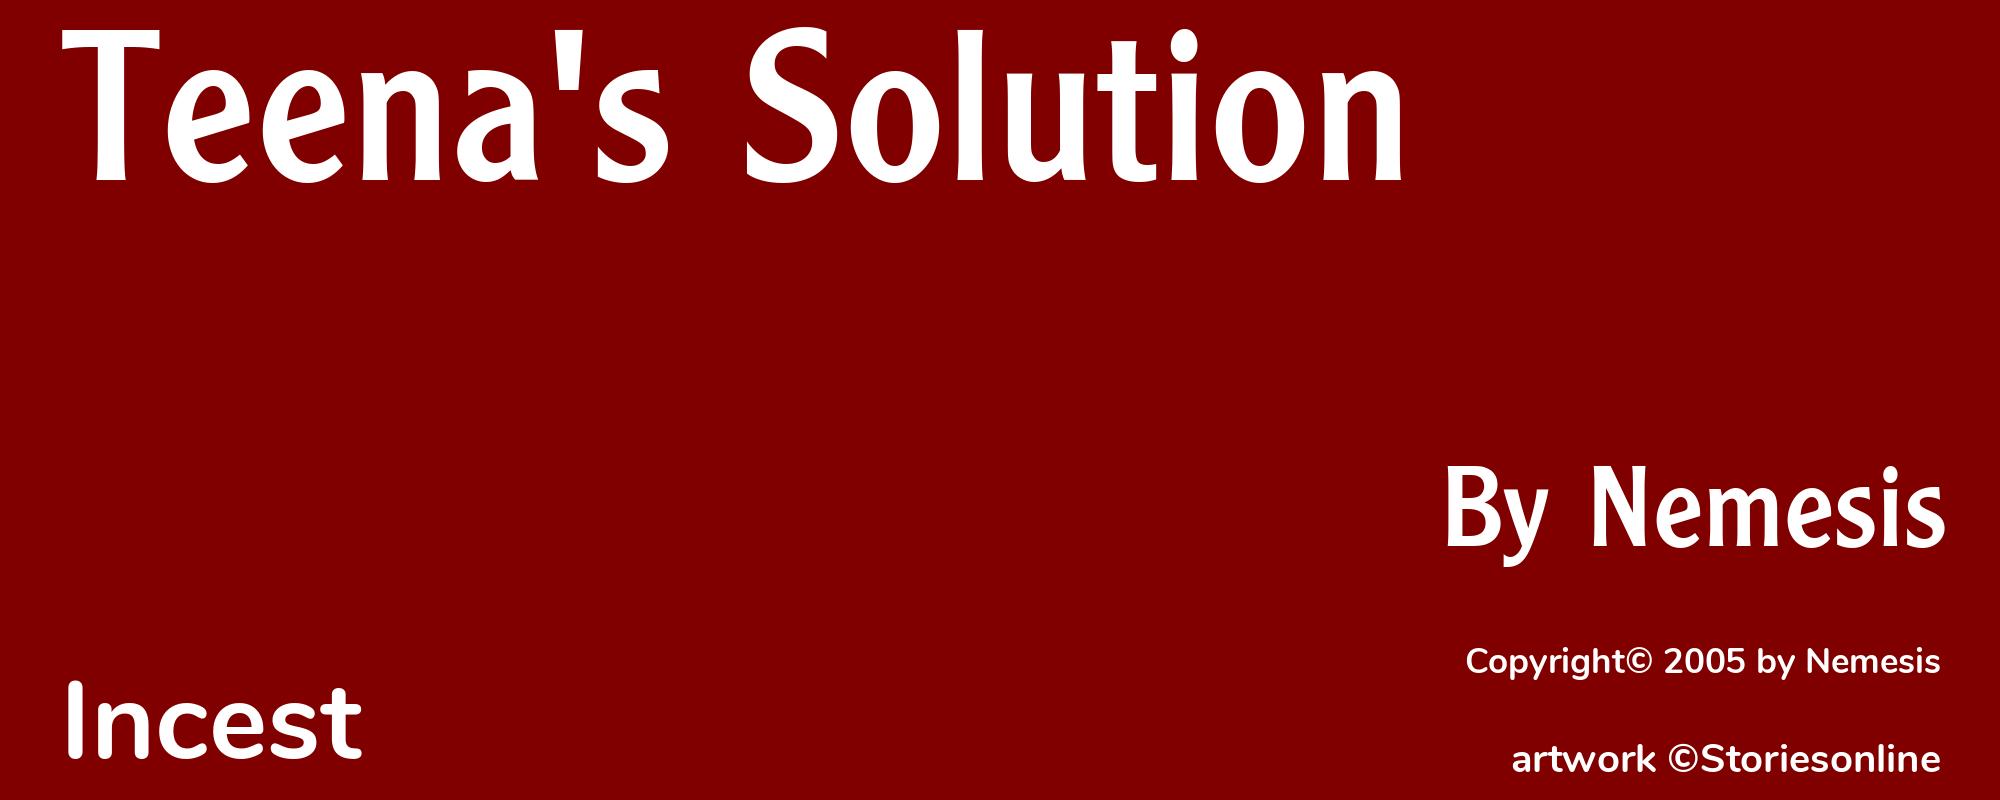 Teena's Solution - Cover